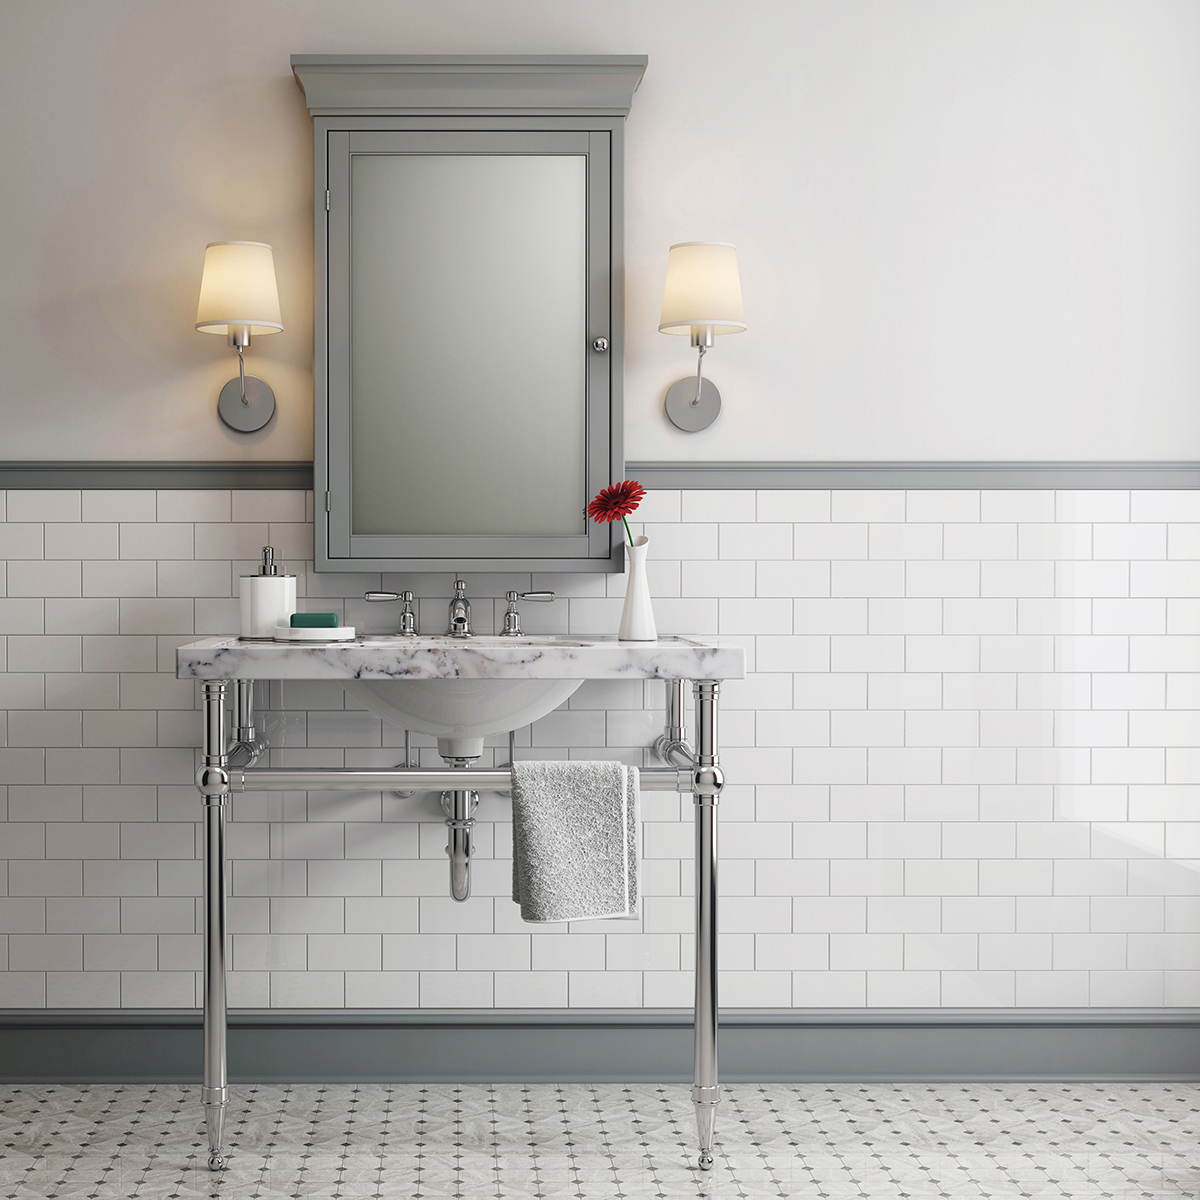 A Tapered Foot Style Leg System In A Classic Subway Tile Bathroom